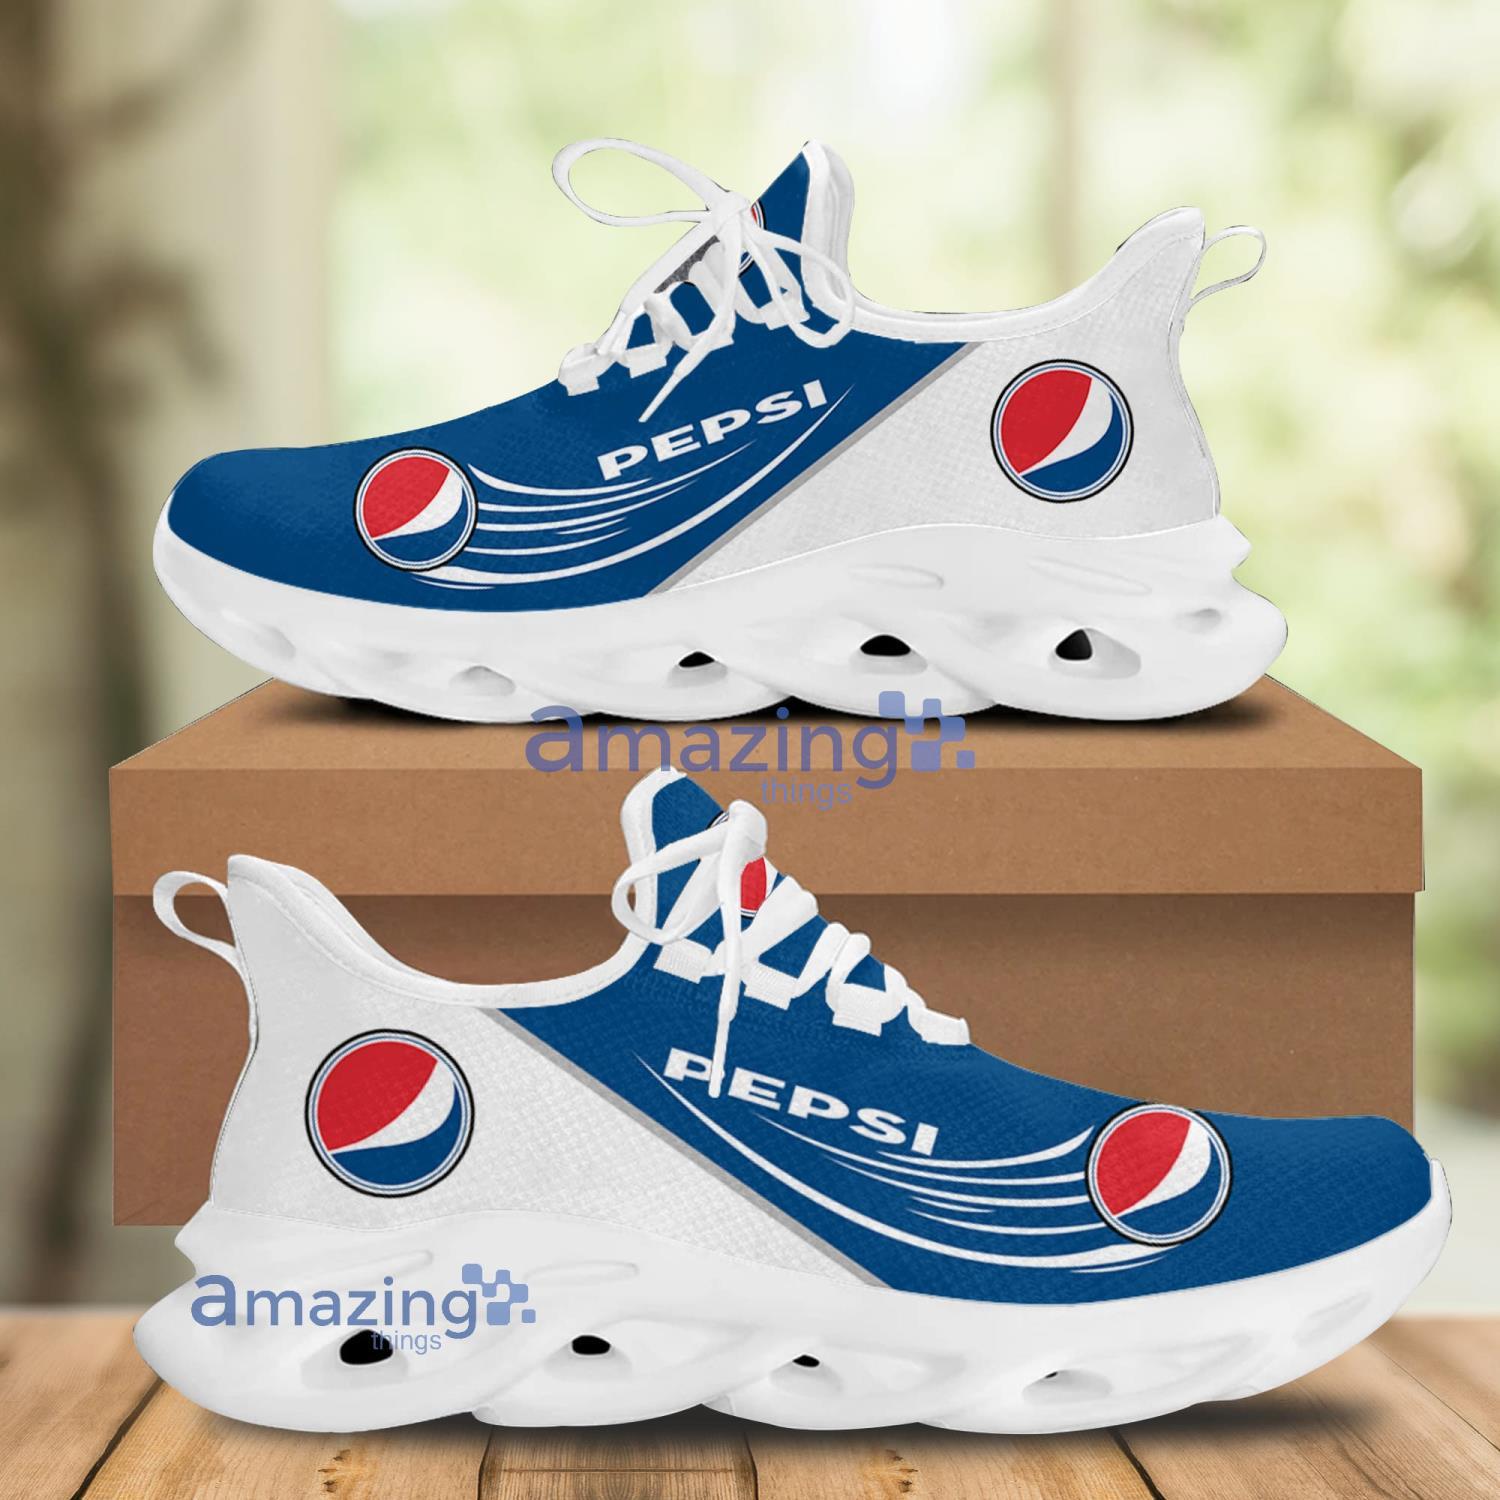 pepsi-max-soul-shoes-chunky-sneakers-for-men-and-women-1.jpg